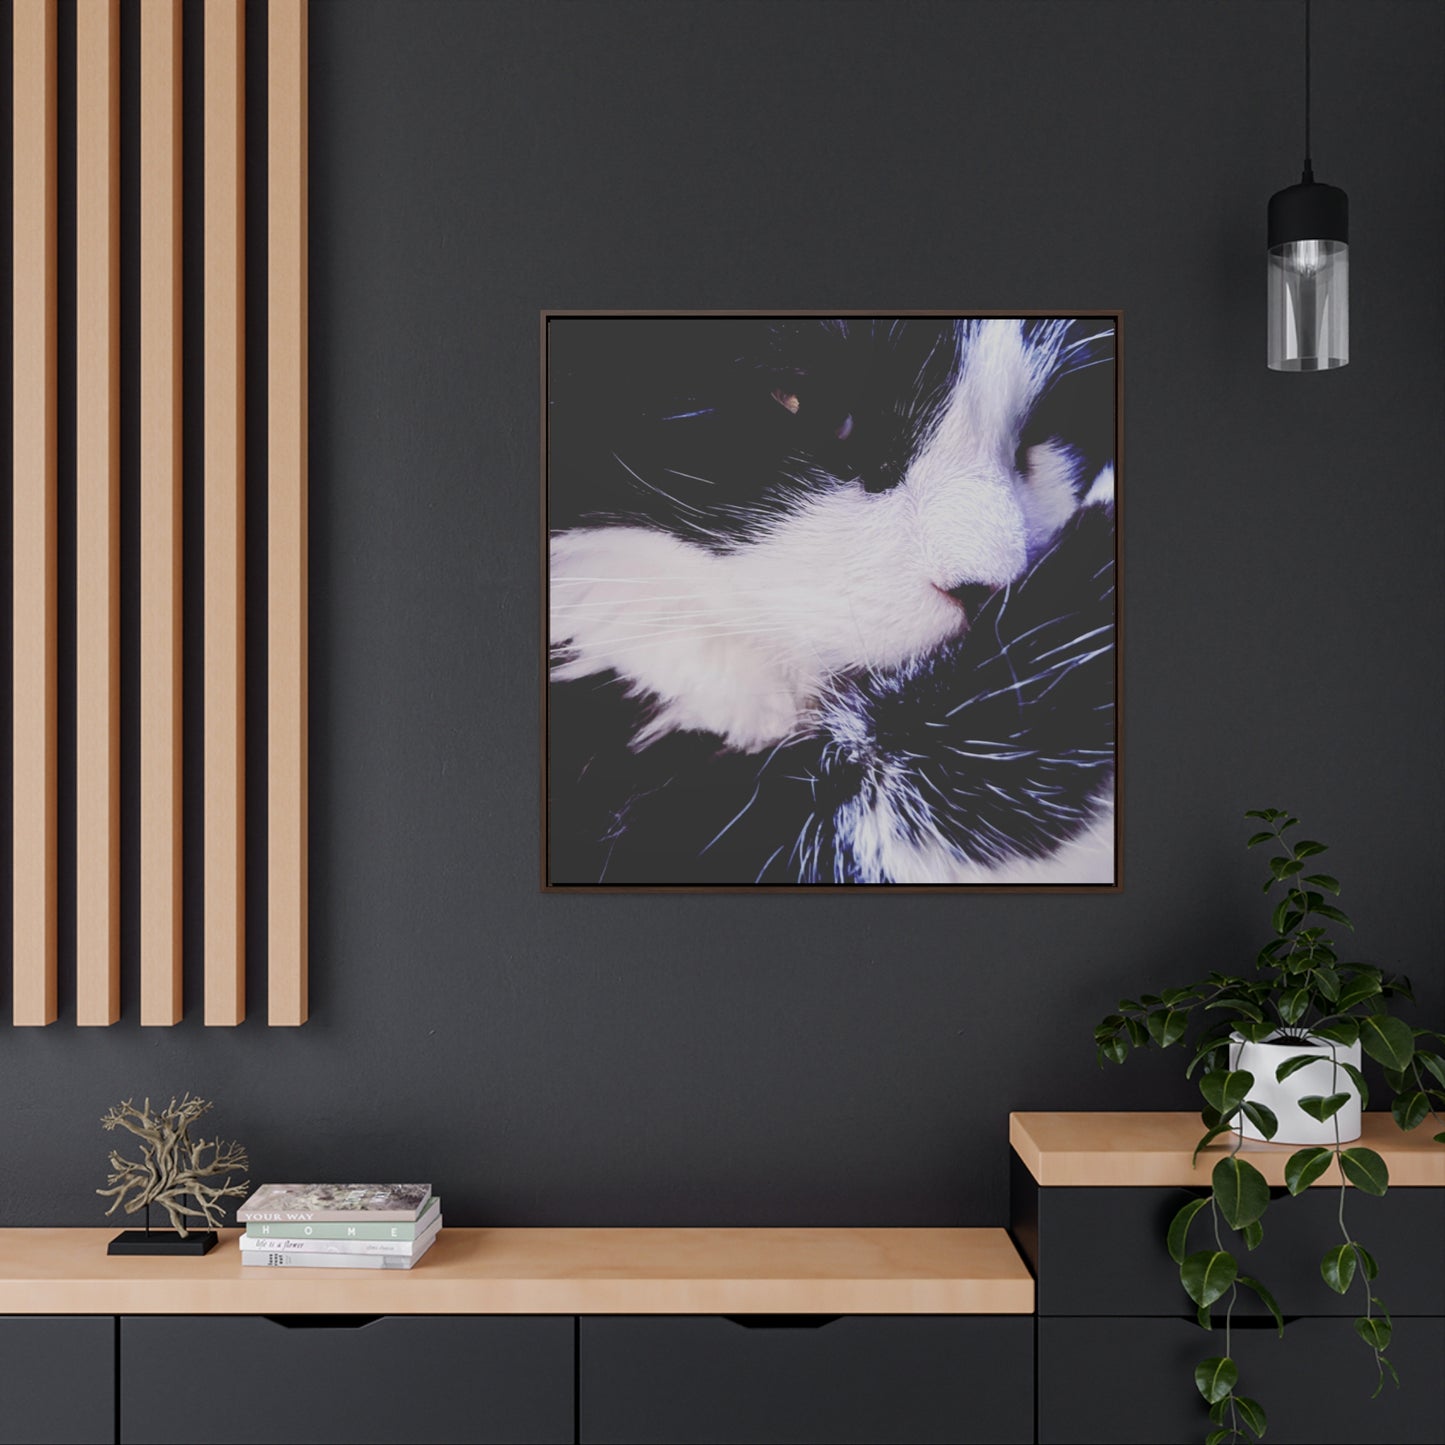 Cat Black and White - Framed Gallery Canvas